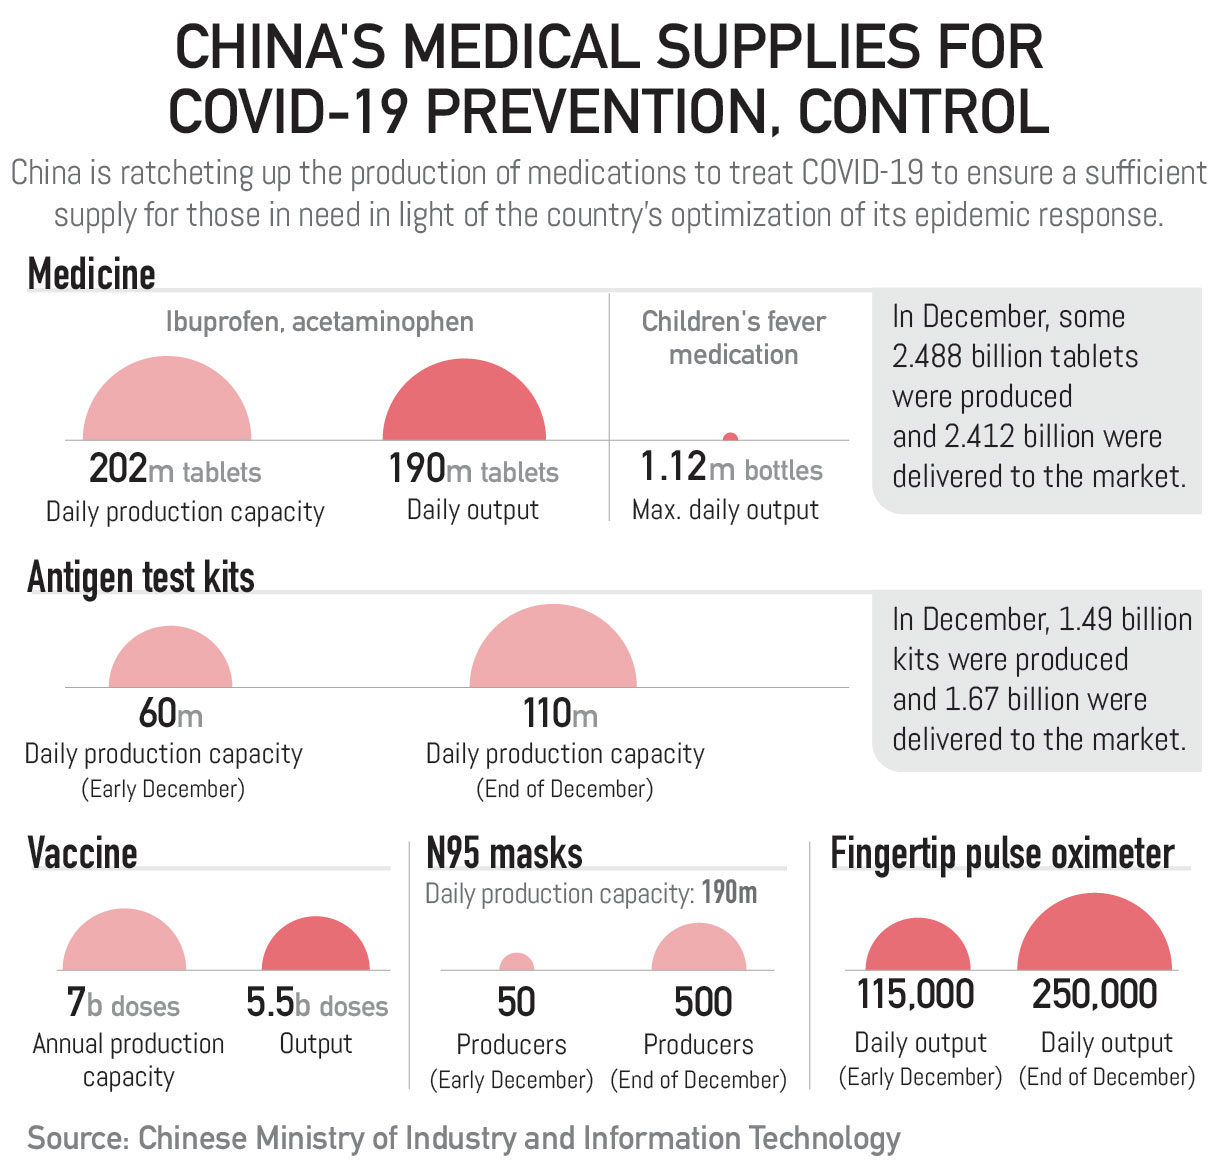 China's COVID-19 fight in numbers: China's medical supplies for COVID-19 prevention, control